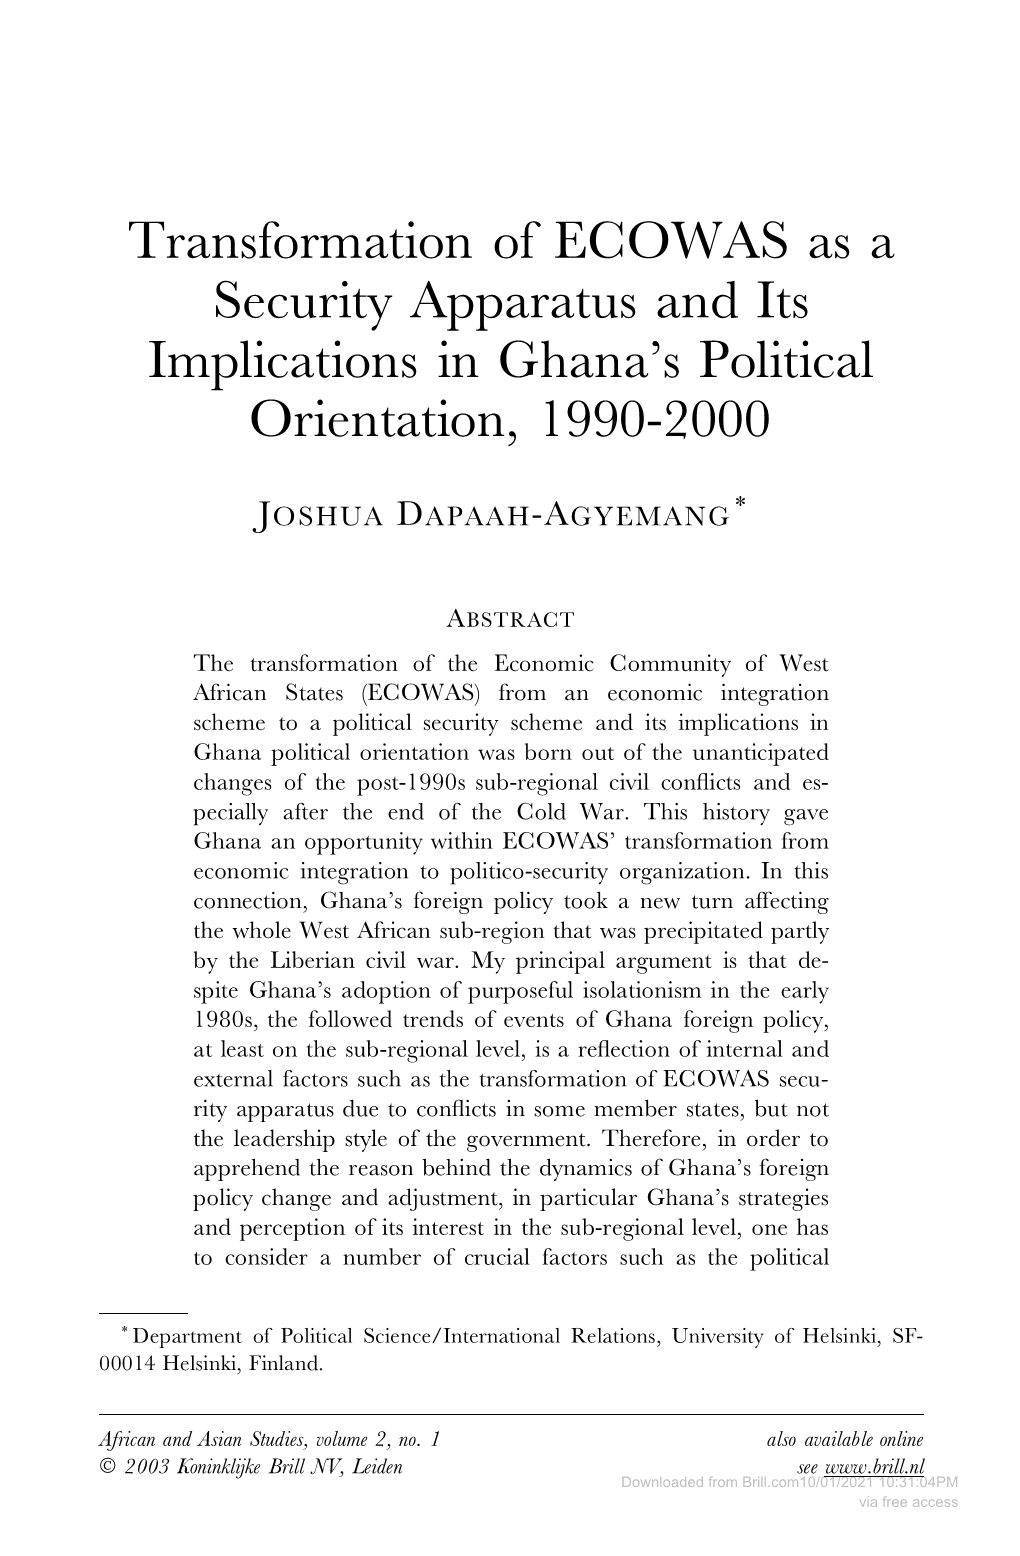 Transformation of ECOWAS As a Security Apparatus and Its